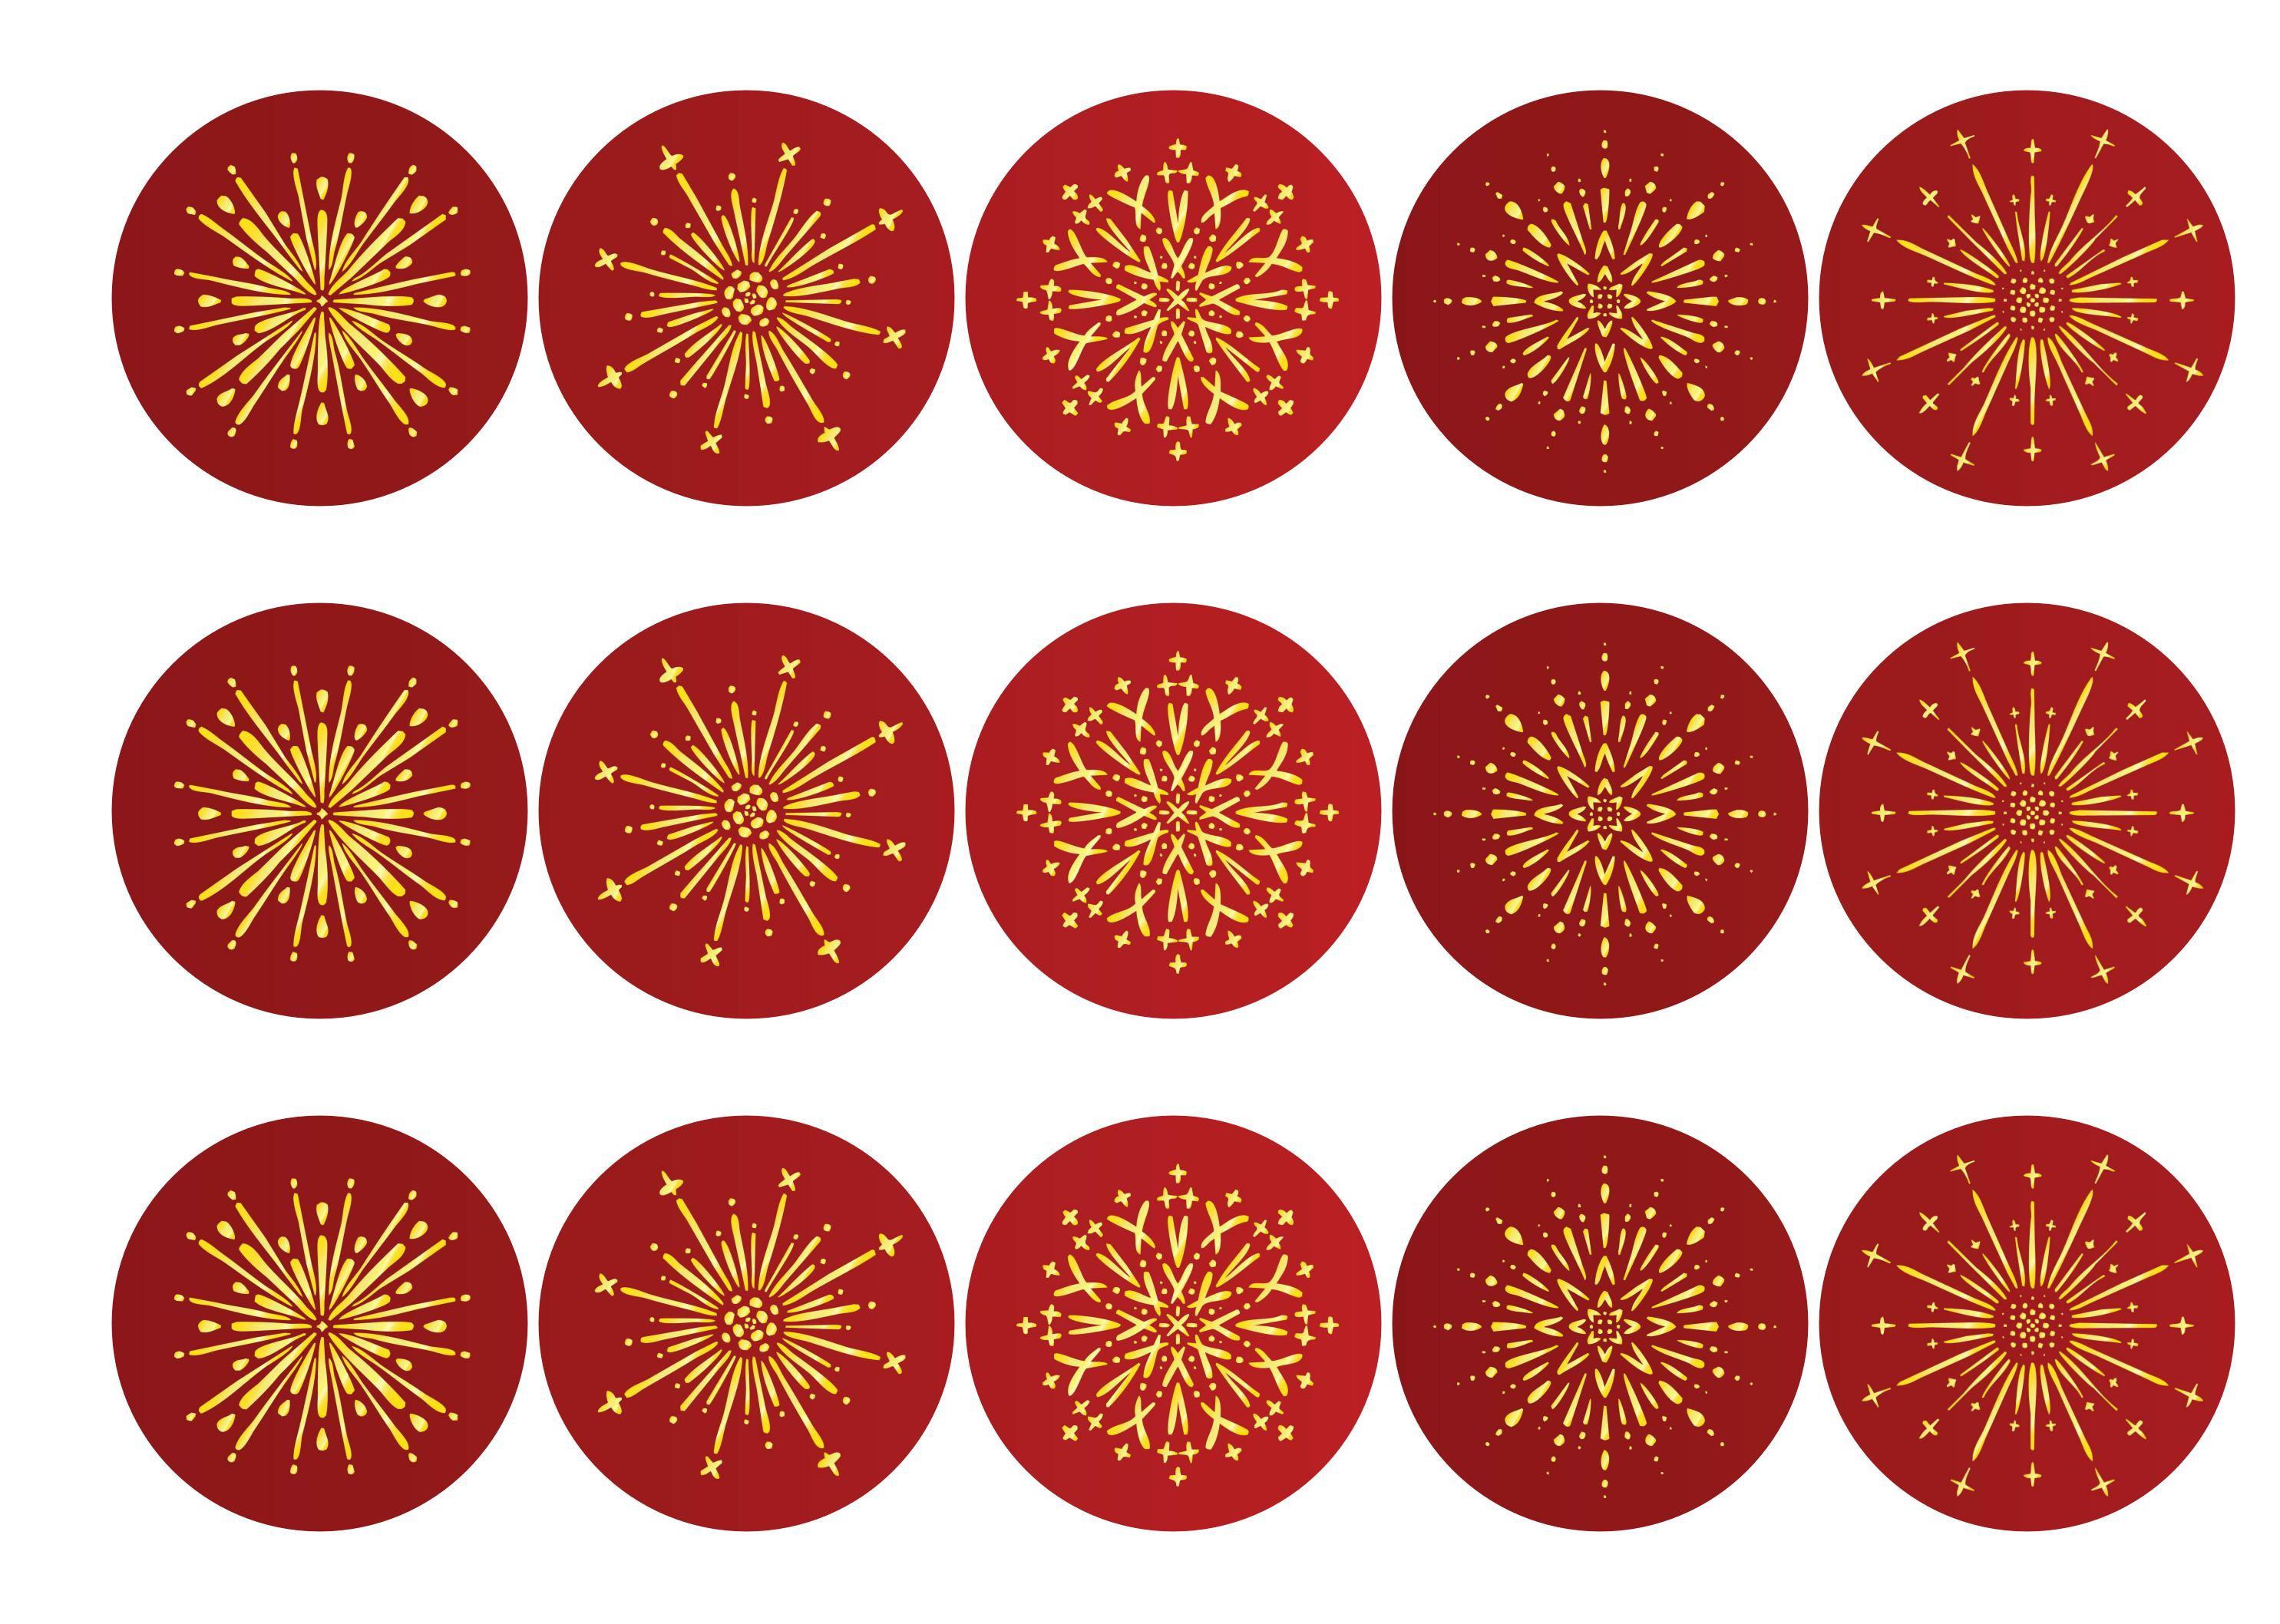 15 printed toppers with red and gold fireworks for the Chinese New Year